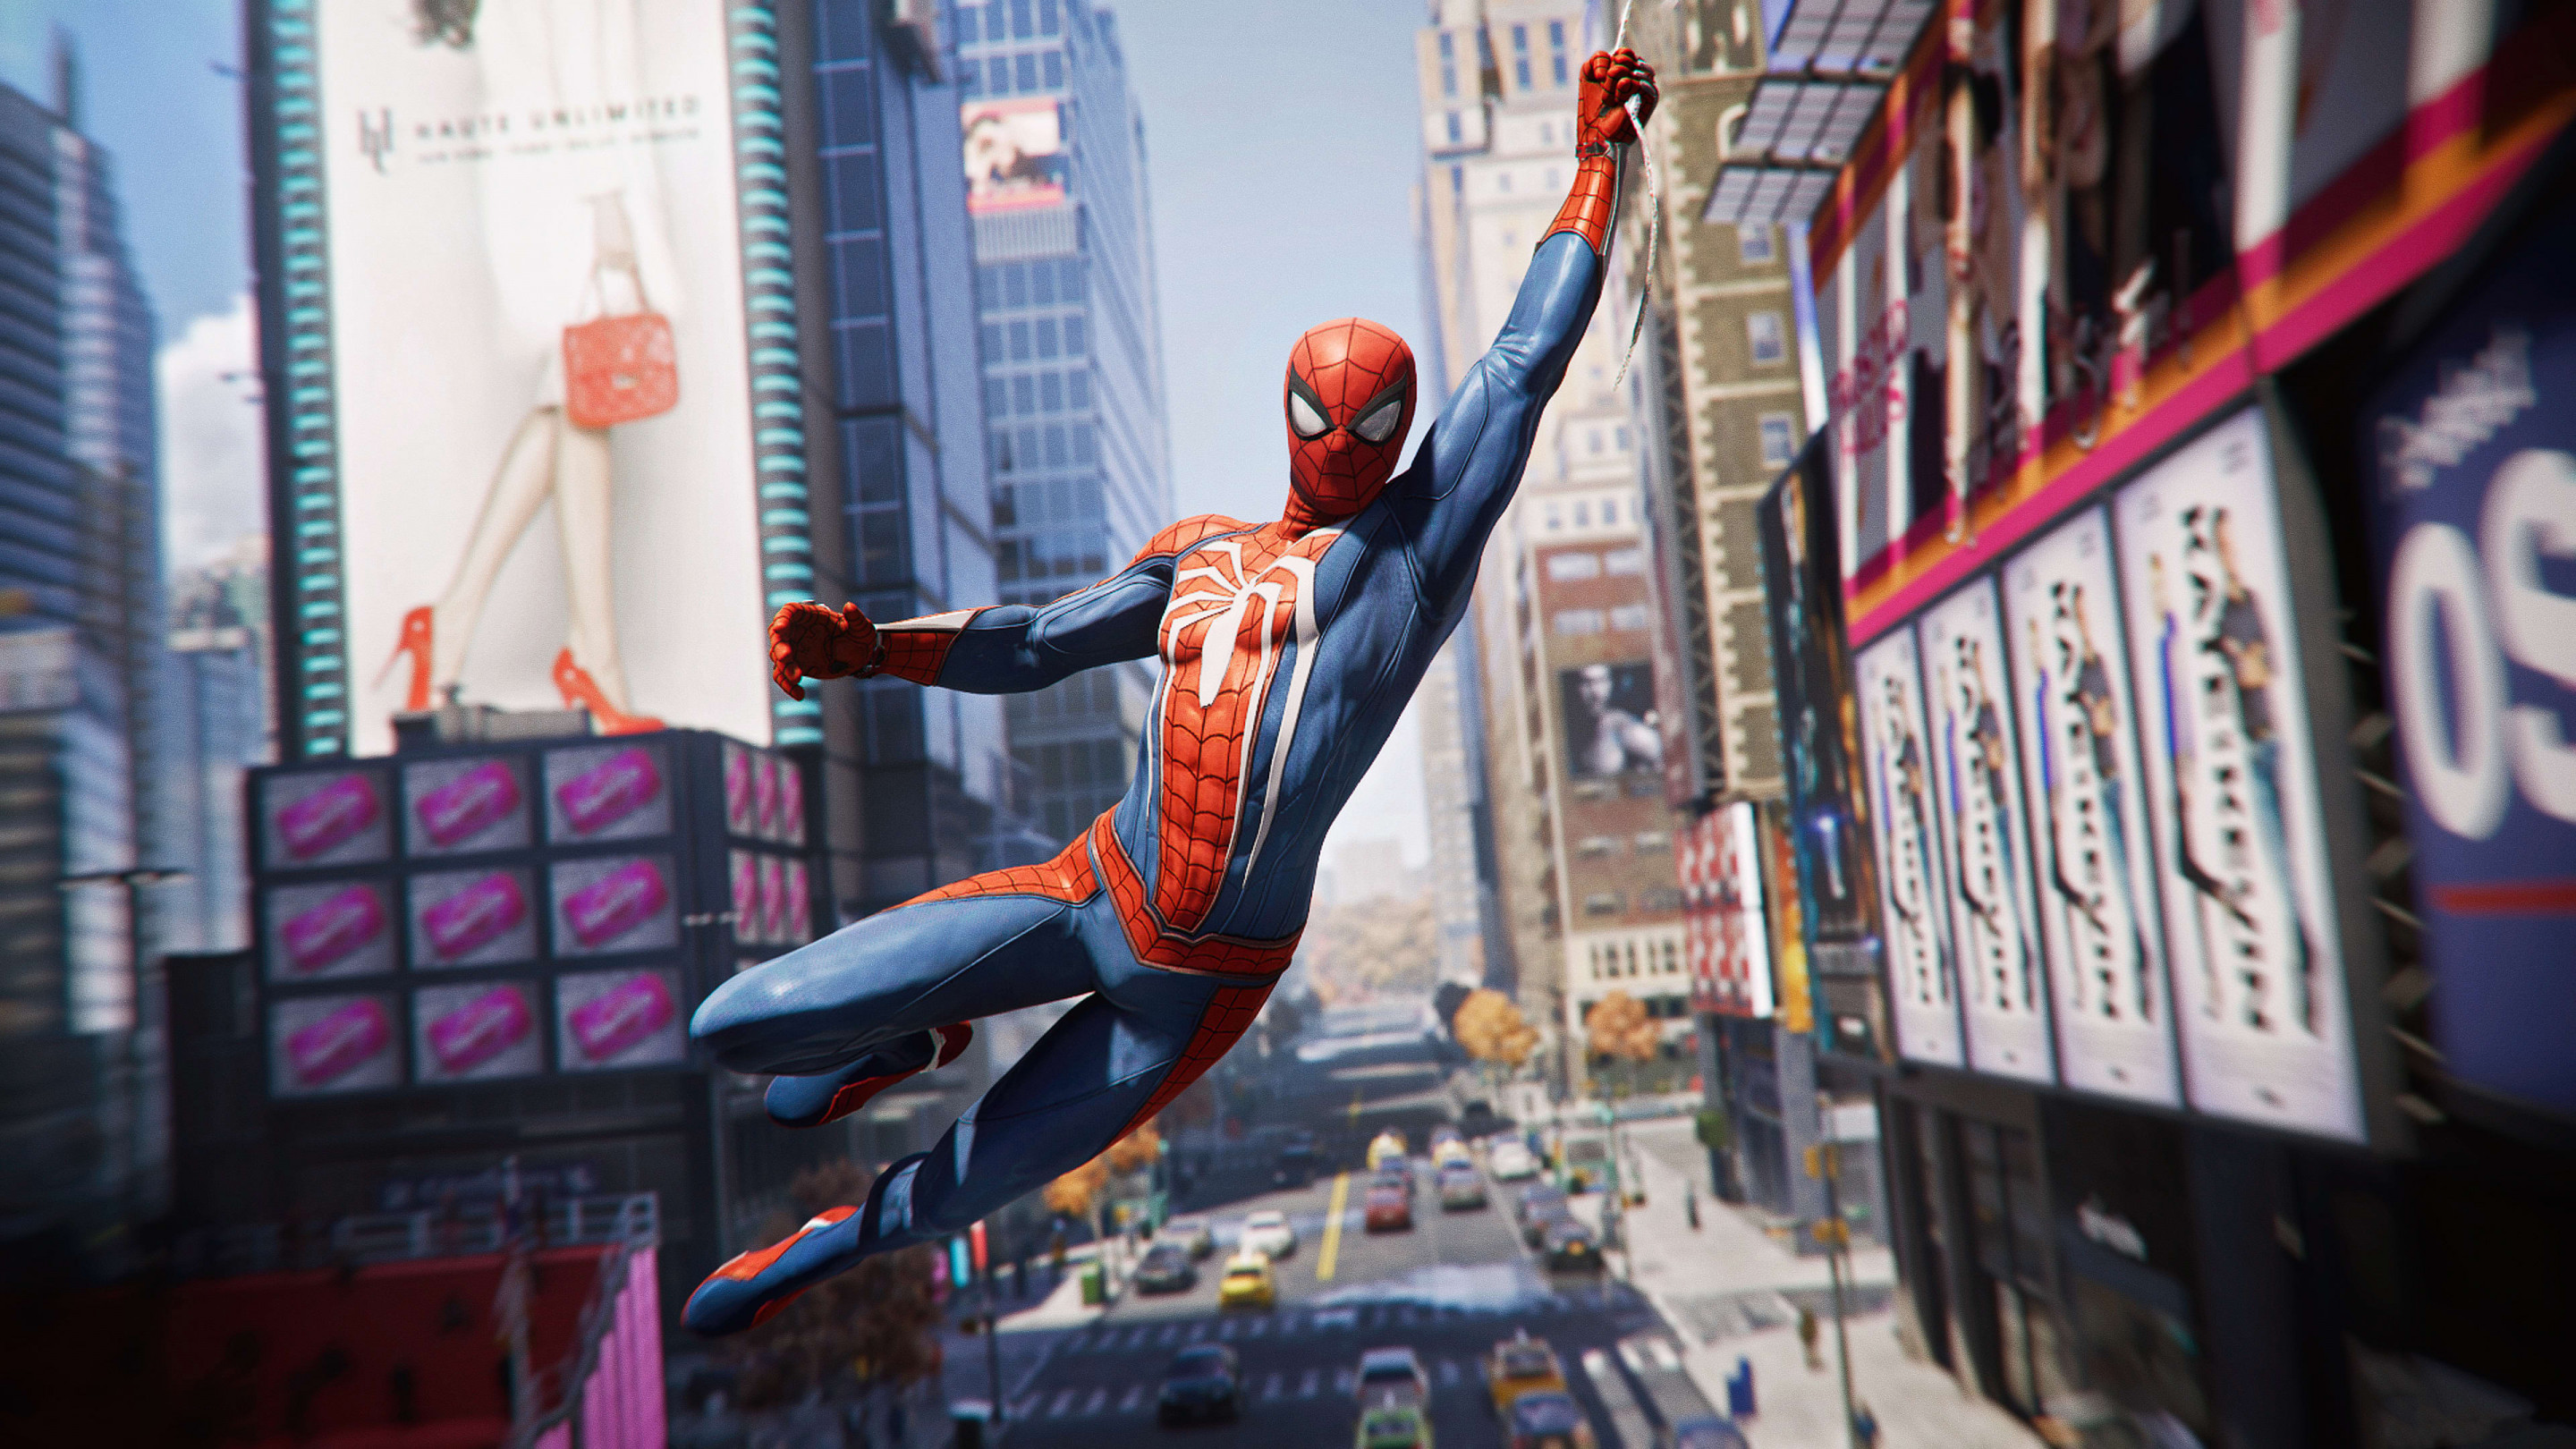 Spider Man from the video game wallpaper 2880x1620